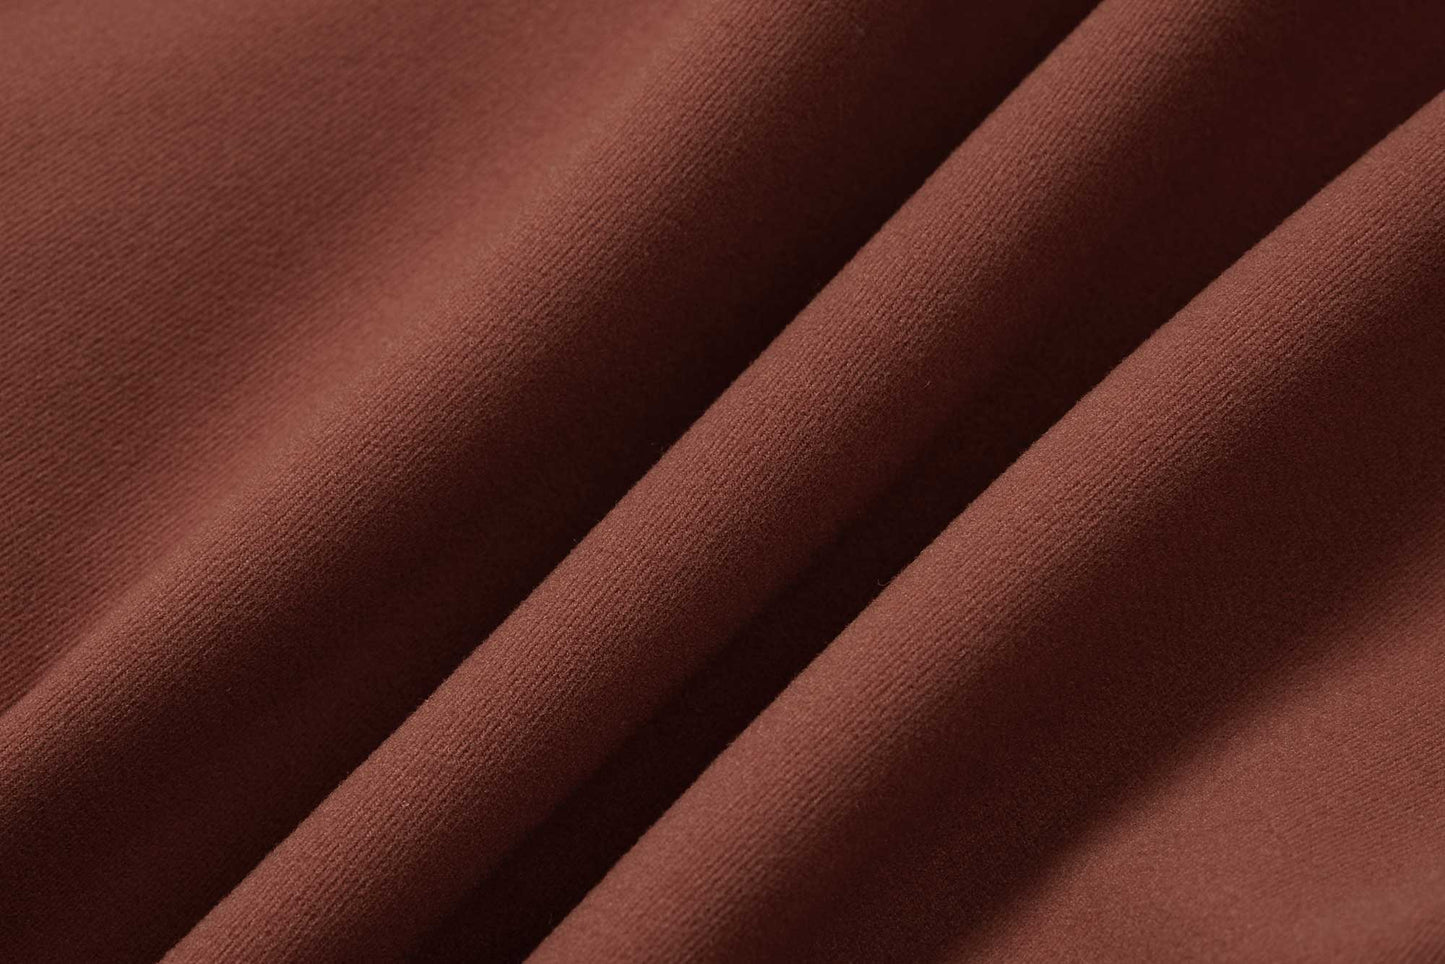 Fabric details of top